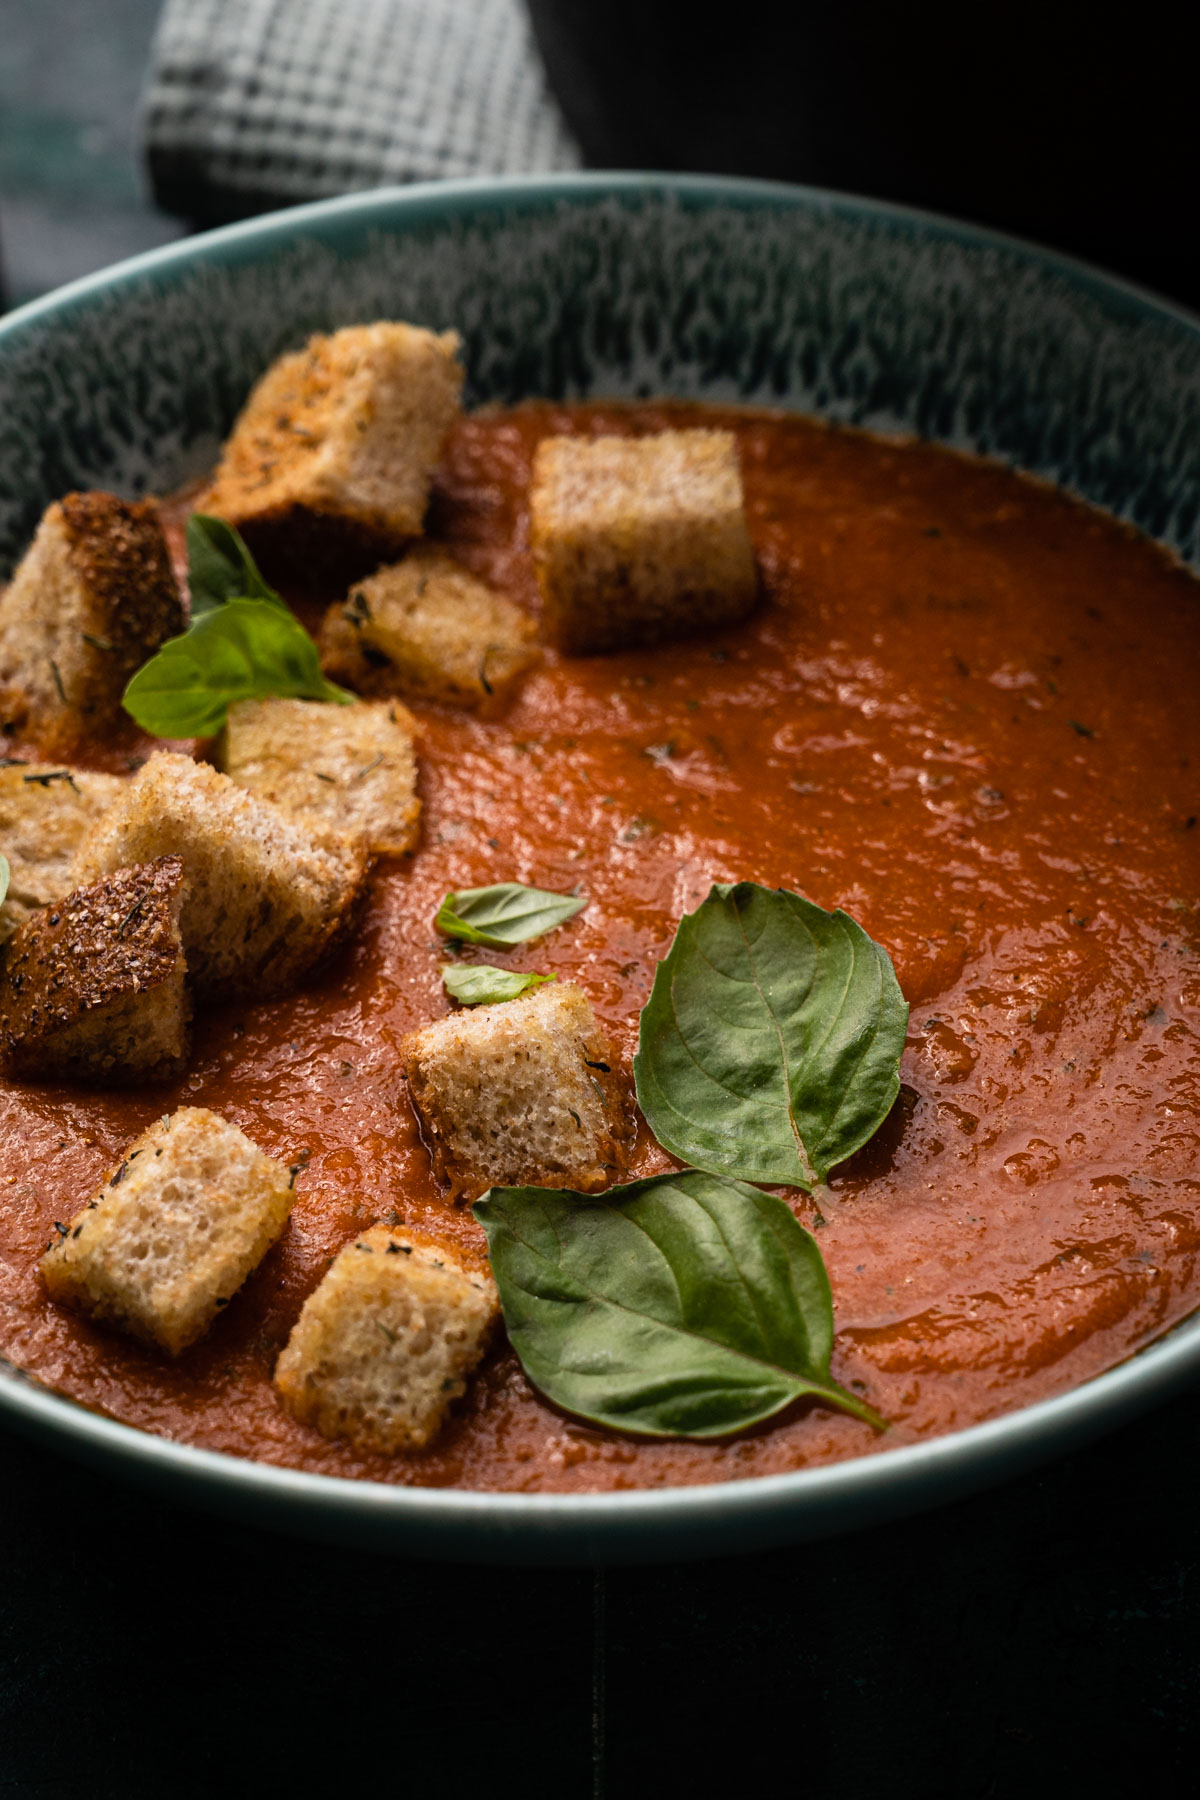 A bowl of tomato soup garnished with basil leaves and topped with croutons, served on a dark surface.